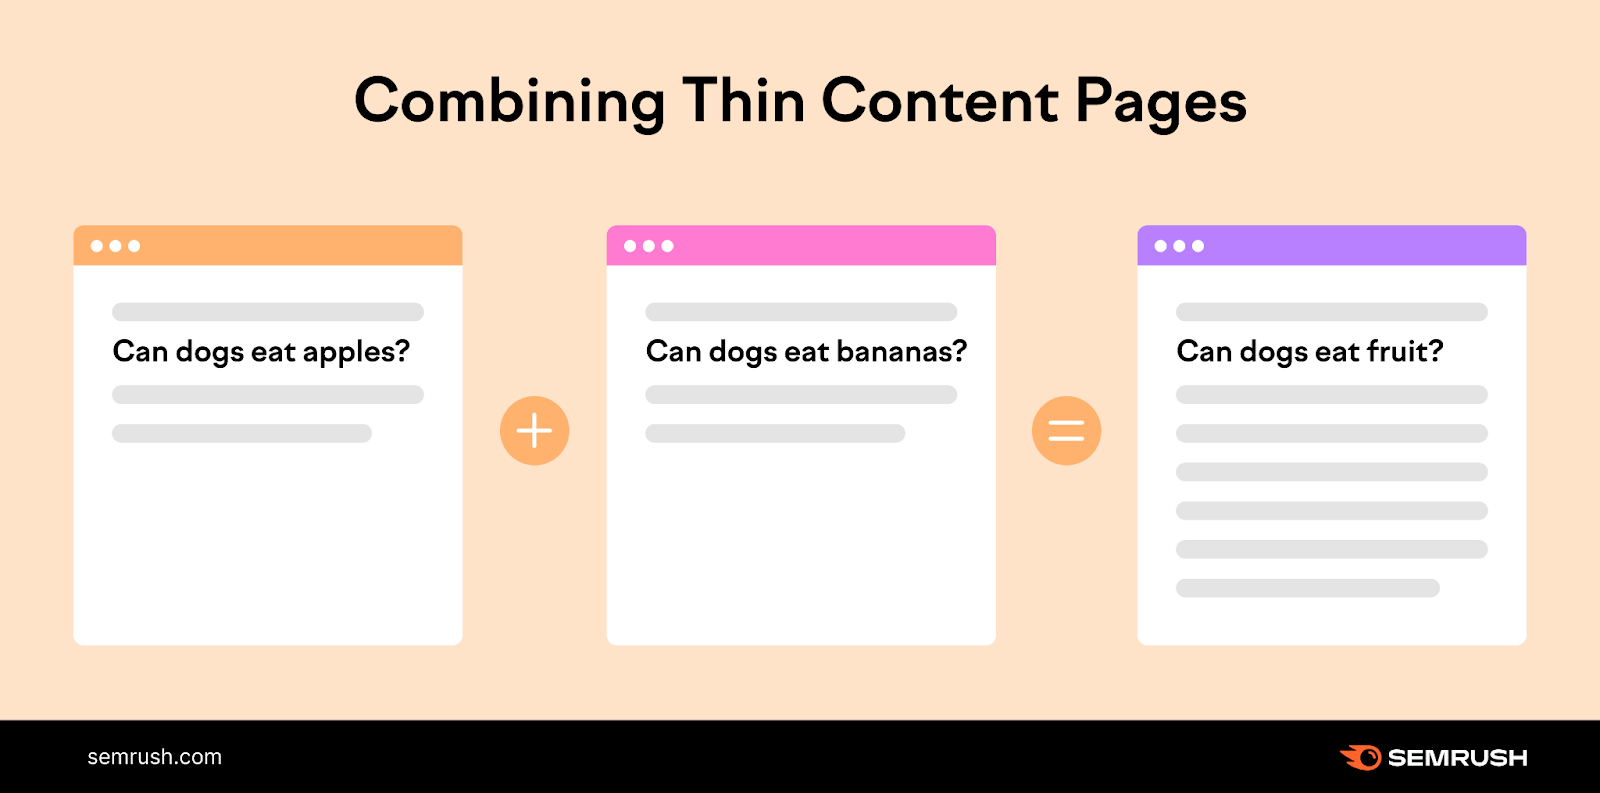 an infographic showing "combining thin content pages"